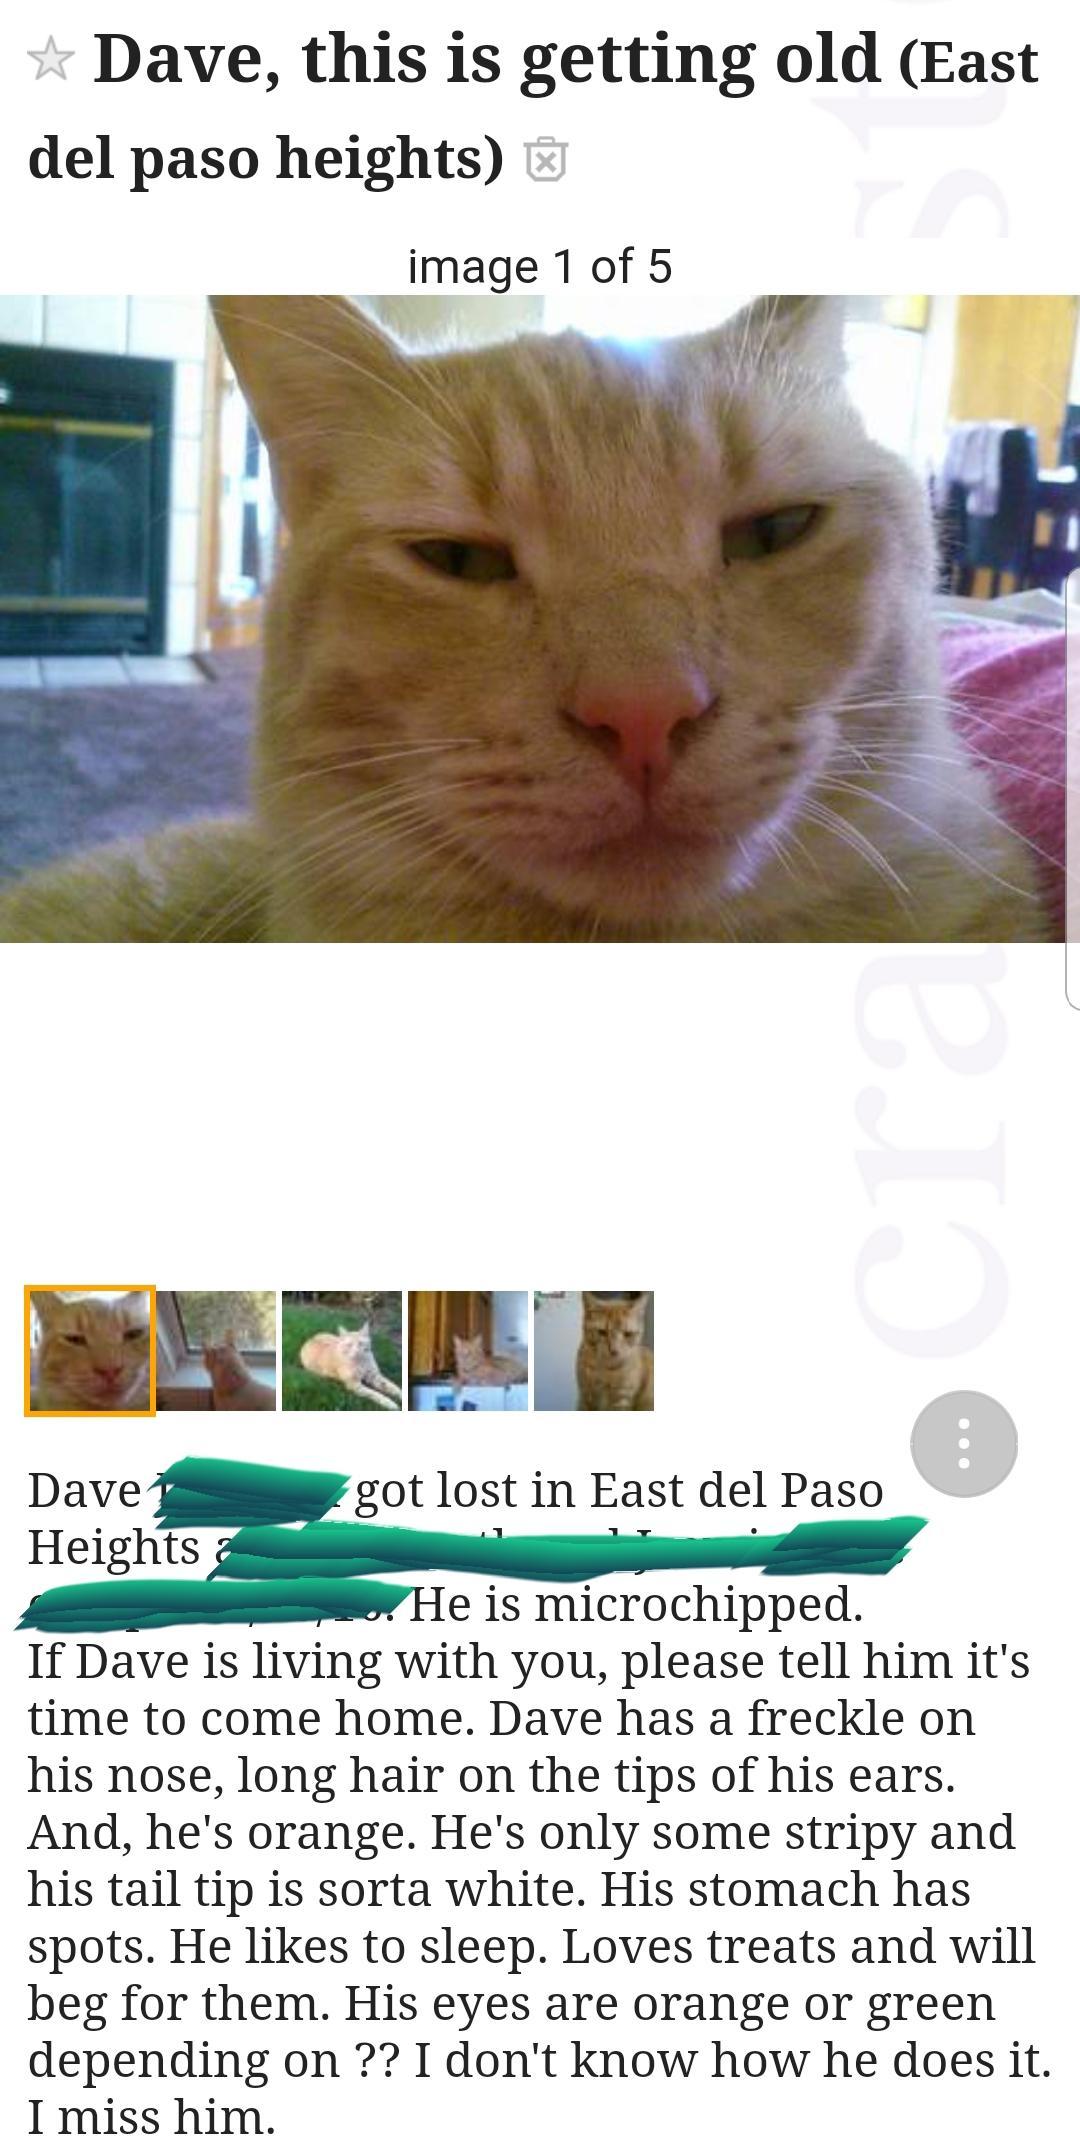 whiskers - Dave, this is getting old East del paso heights image 1 of 5 Dave got lost in East del Paso Heights He is microchipped. If Dave is living with you, please tell him it's time to come home. Dave has a freckle on his nose, long hair on the tips of